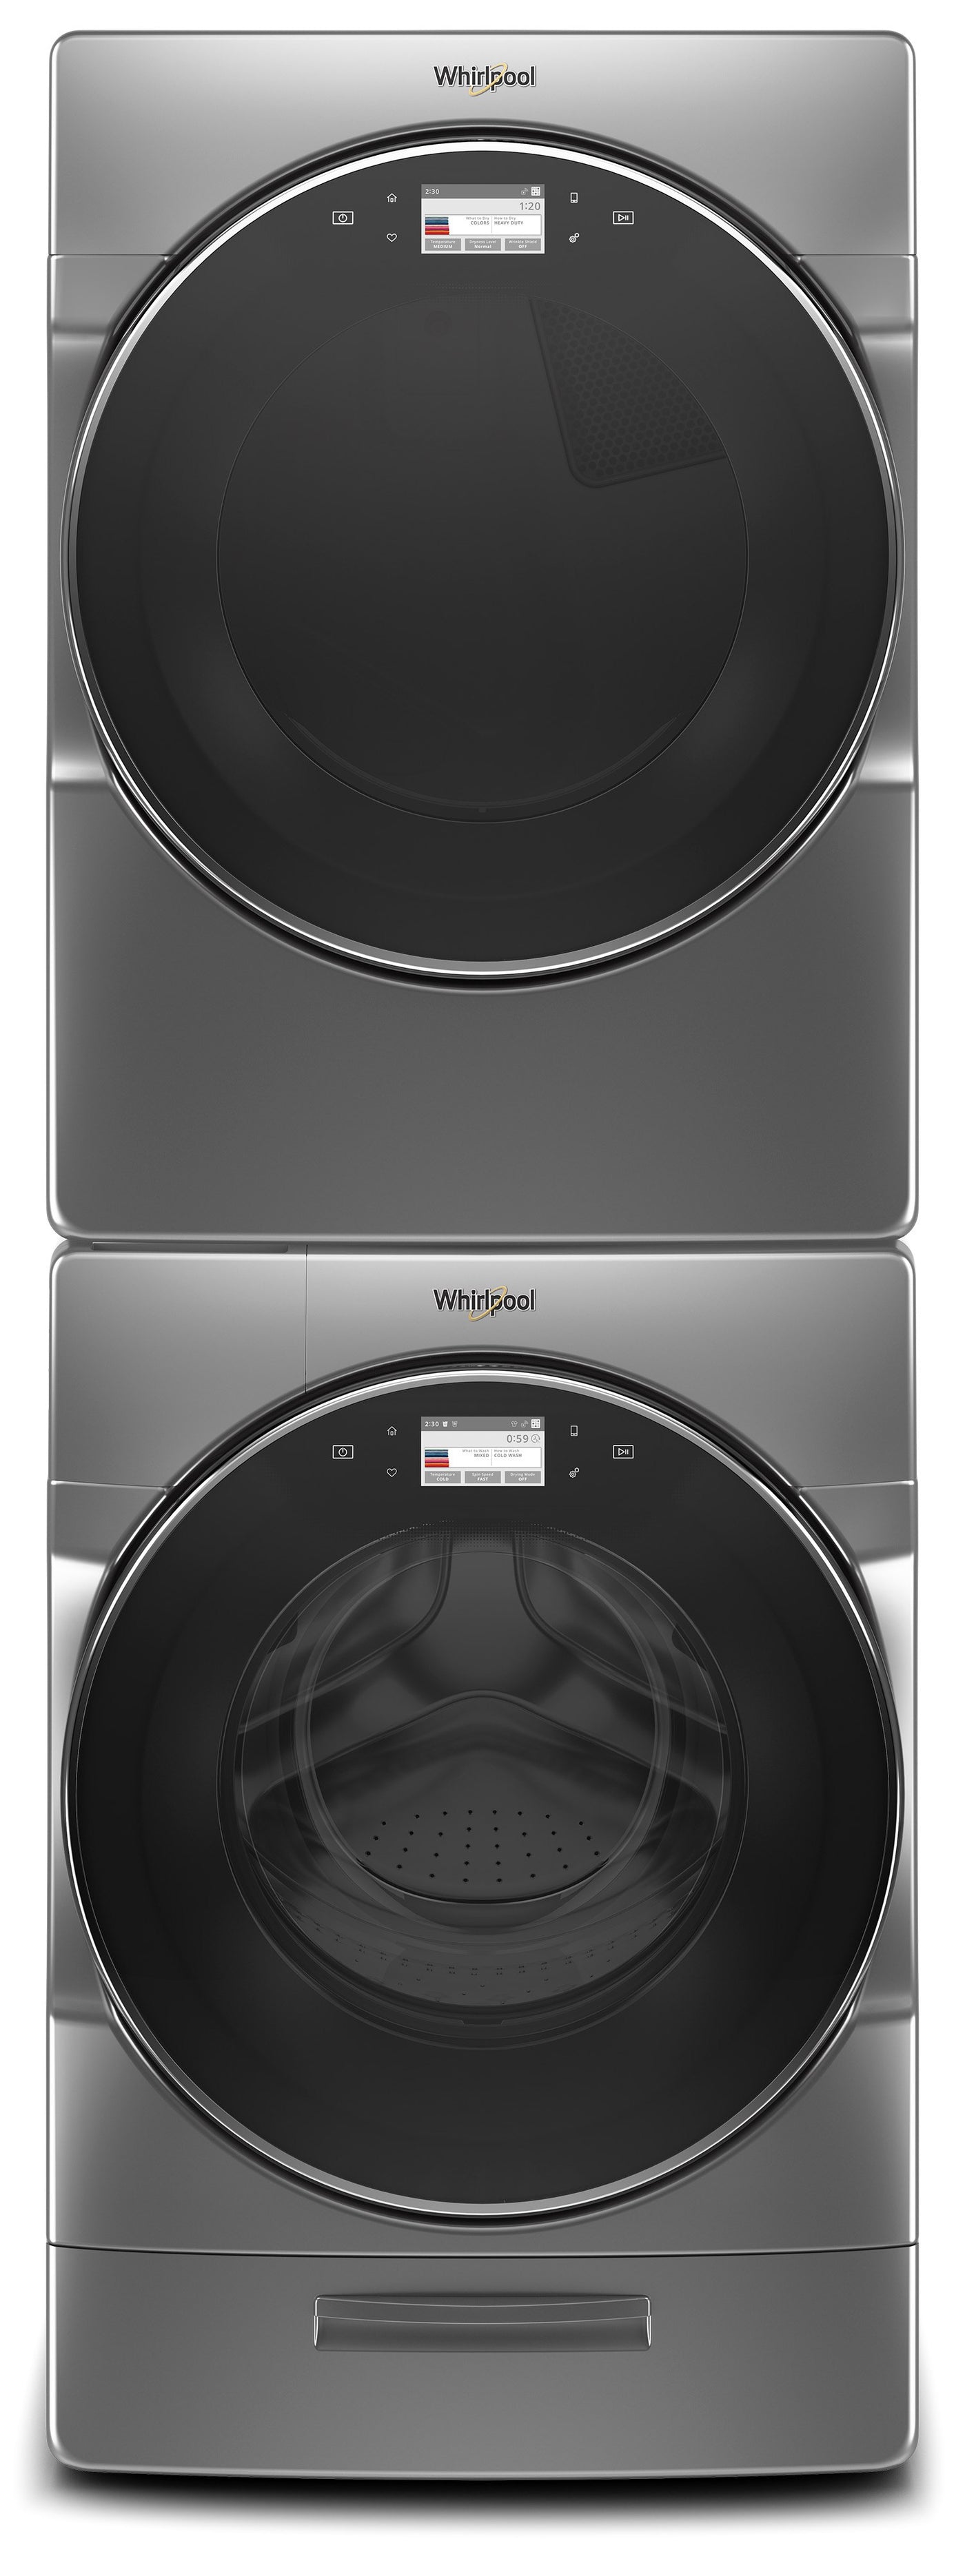 Whirlpool Chrome Shadow Front-Load Washer (5.8 cu. ft.) & Electric Dryer (7.4 cu. ft.) - WFW9620HC/YWED9620HC